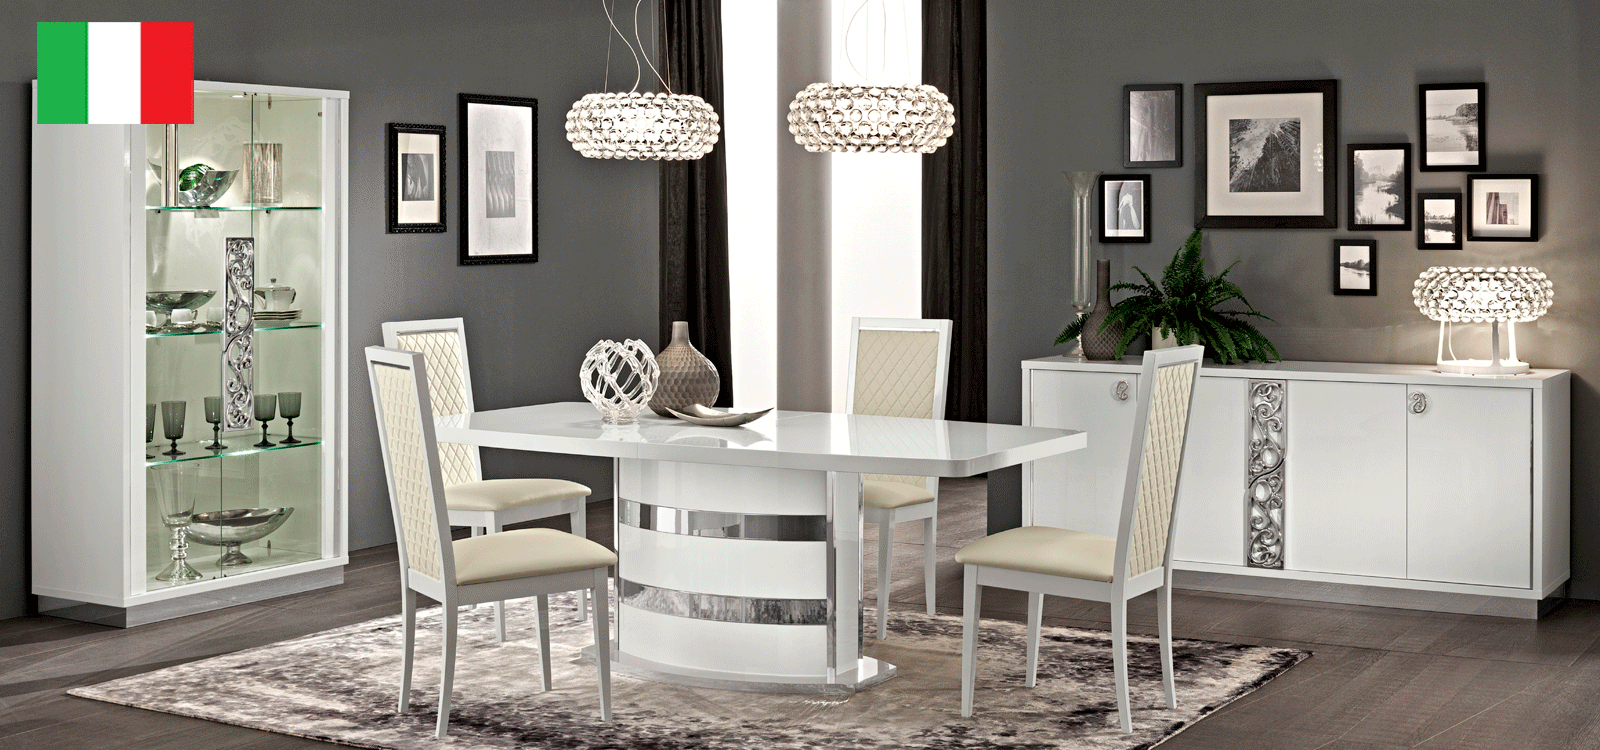 Dining Room Furniture Tables Roma Dining White, Italy